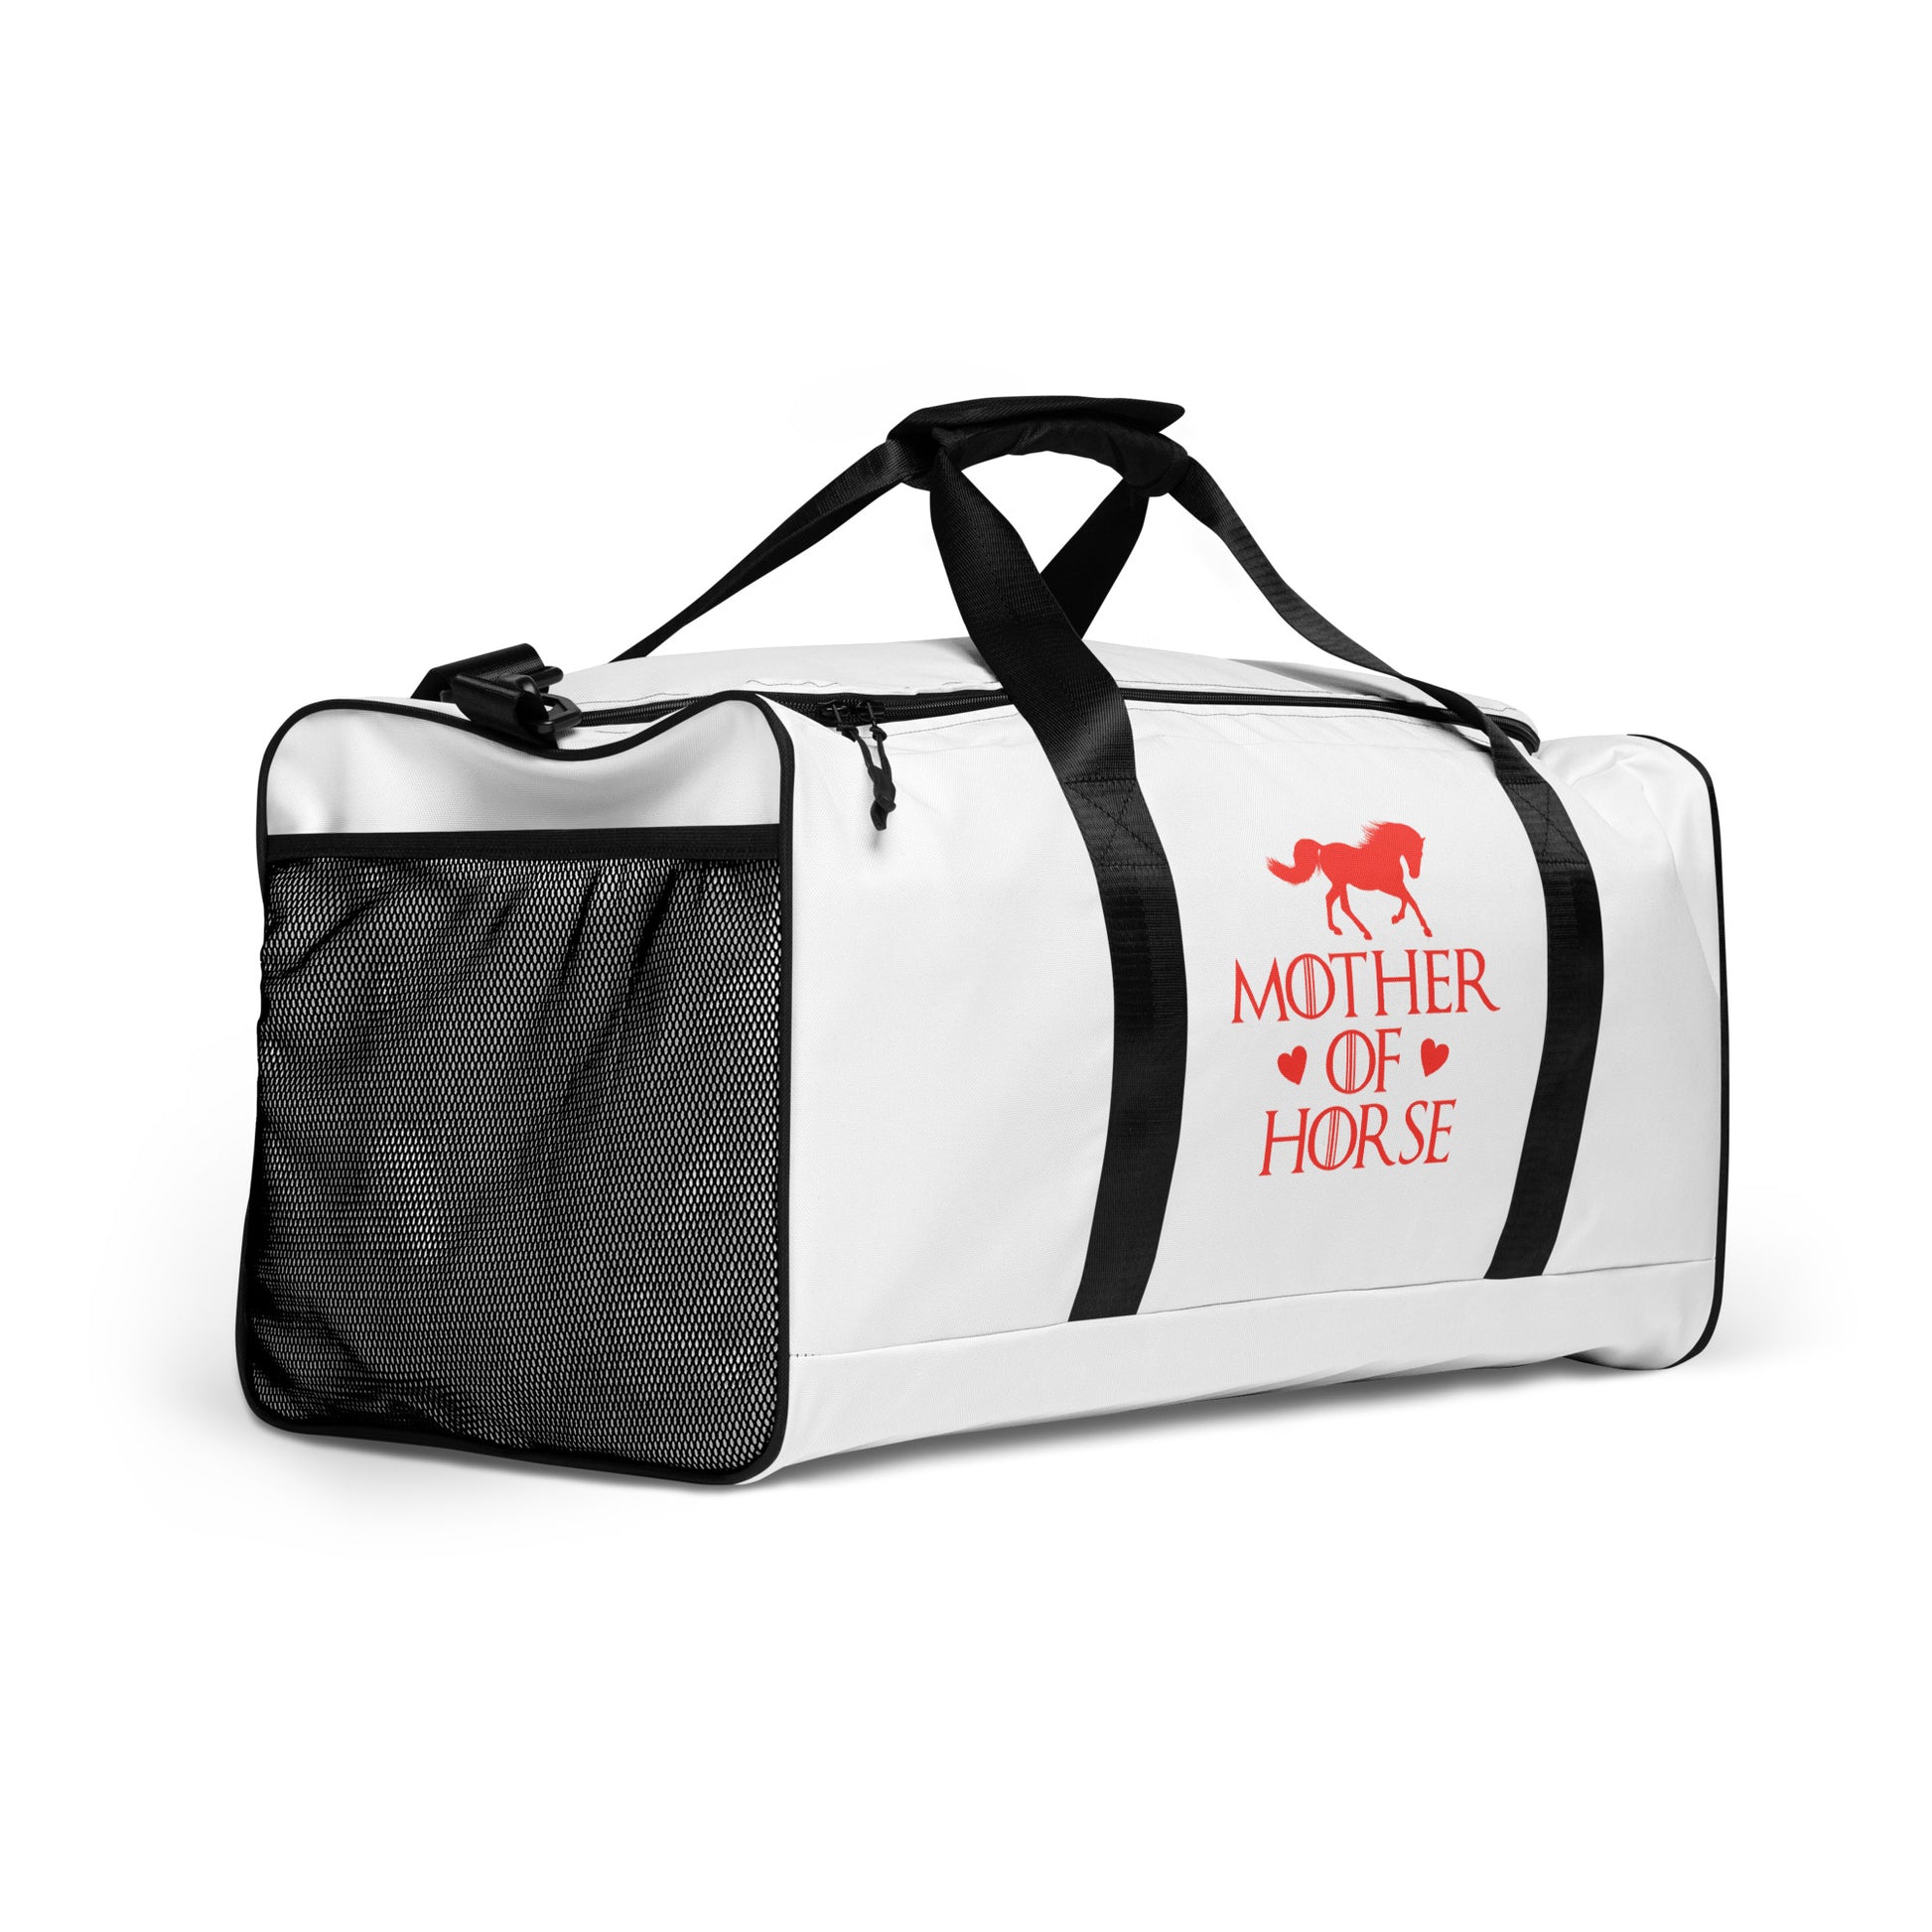 Duffle bag- Mother of Horse - offthespeed